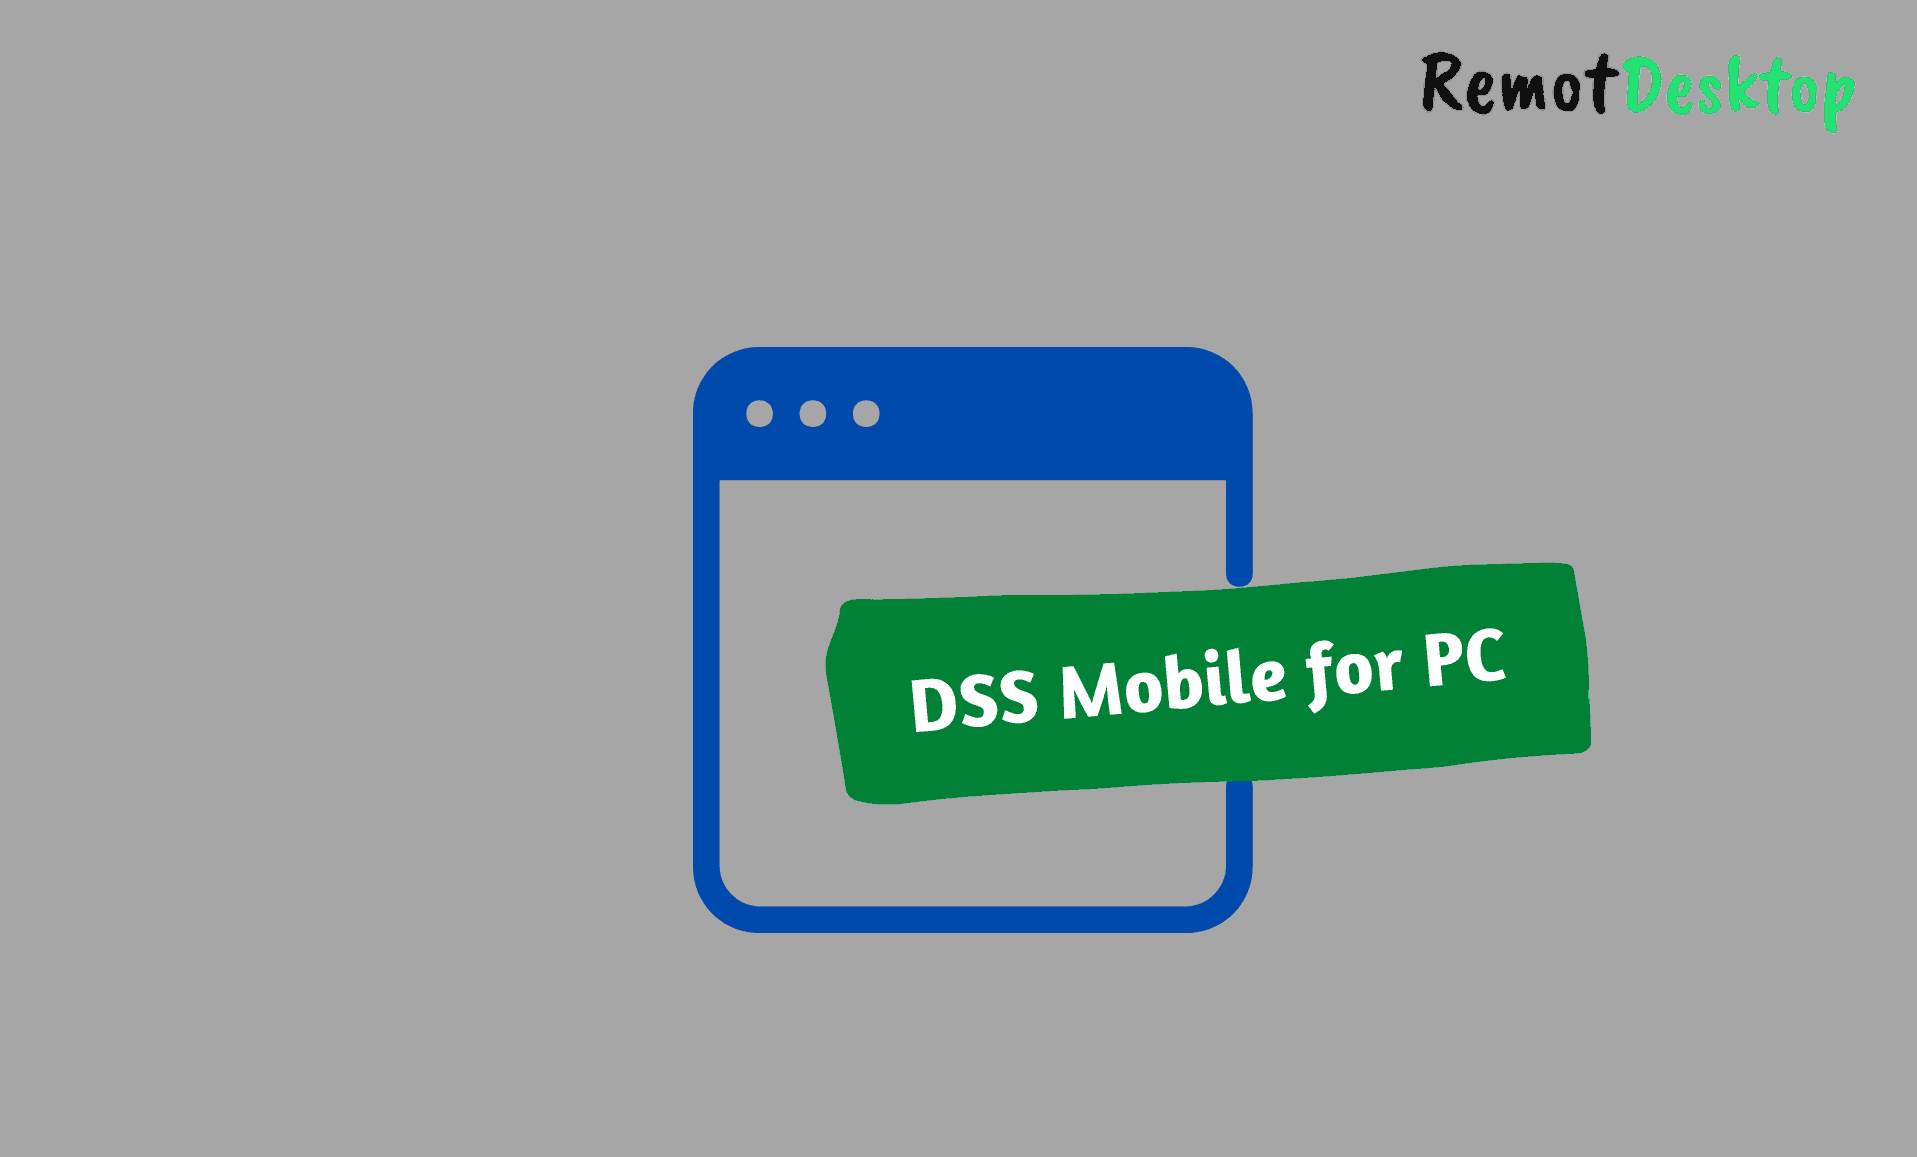 DSS Mobile for PC